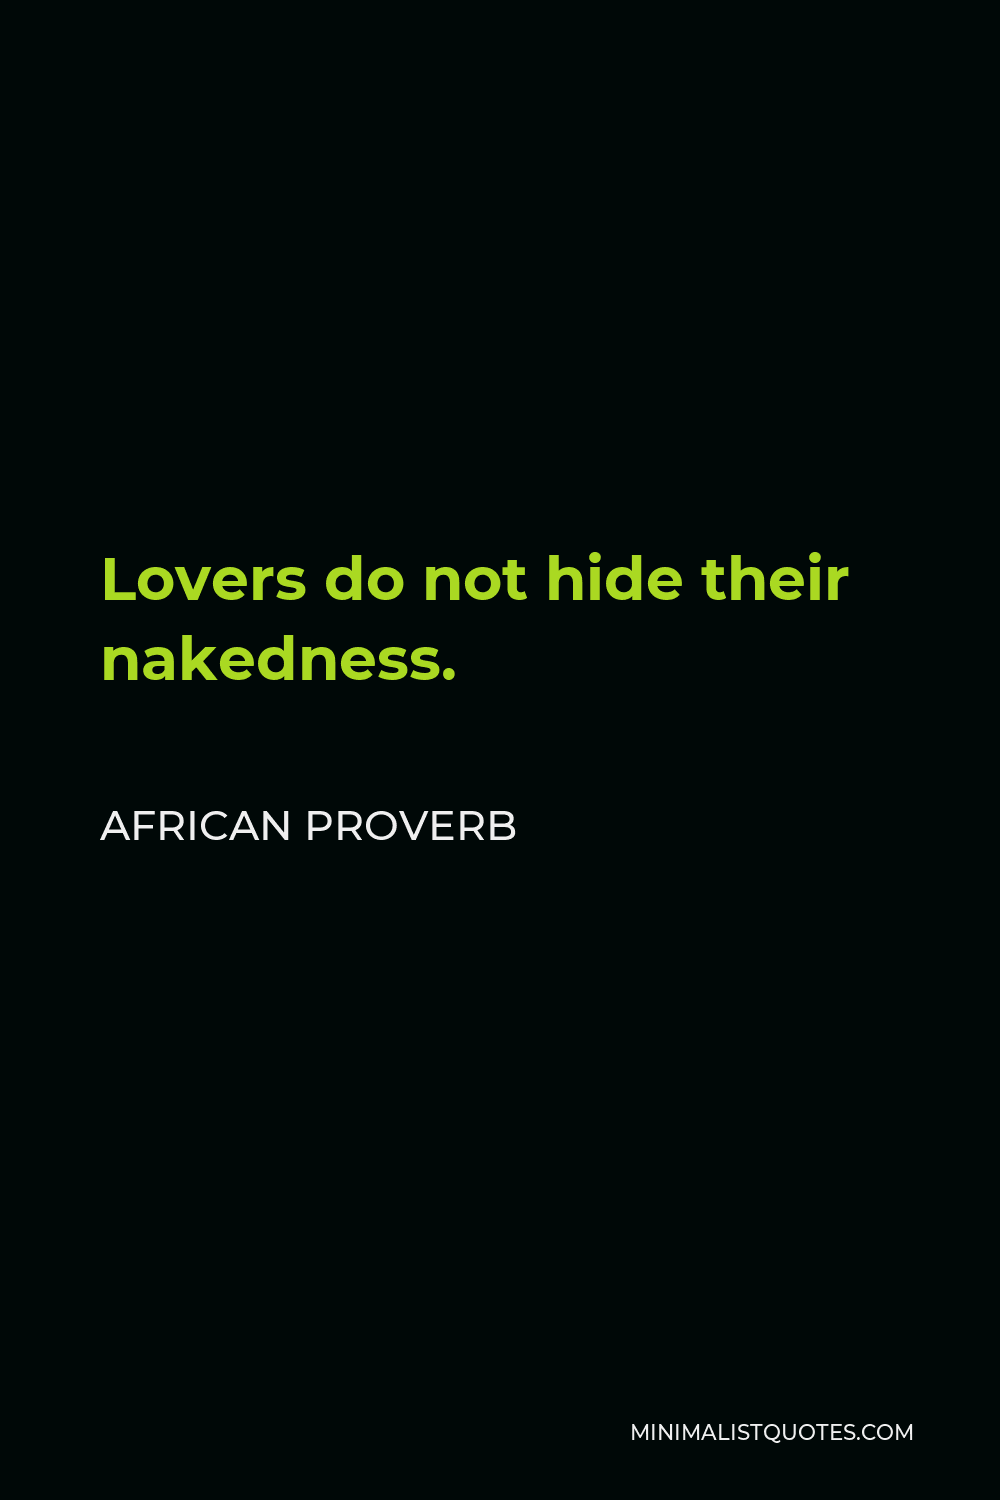 African Proverb Quote - Lovers do not hide their nakedness.